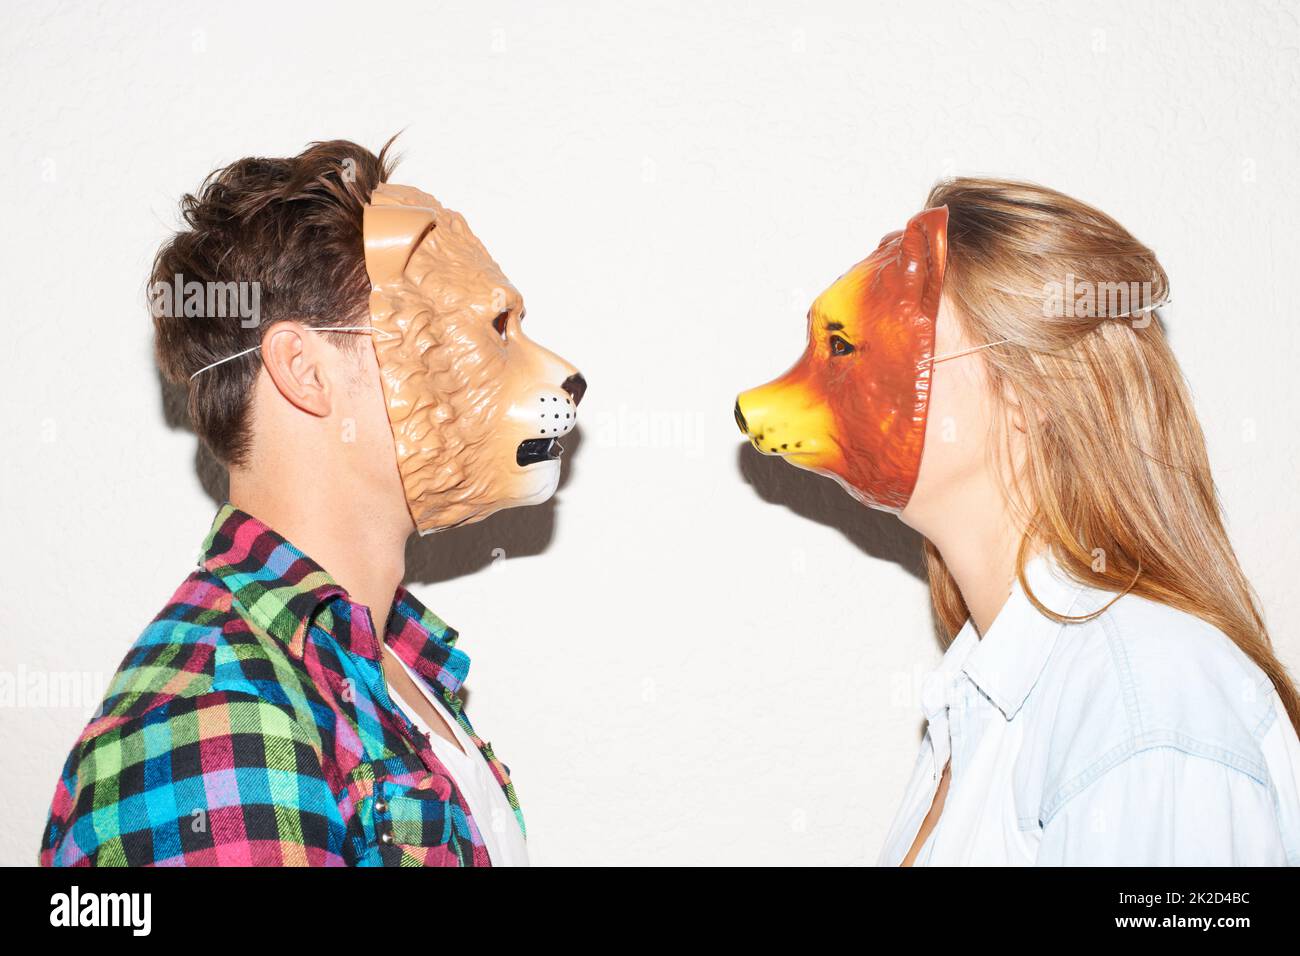 Facing off with animalistic intent. Shot of two young people face to face wearing animal masks. Stock Photo